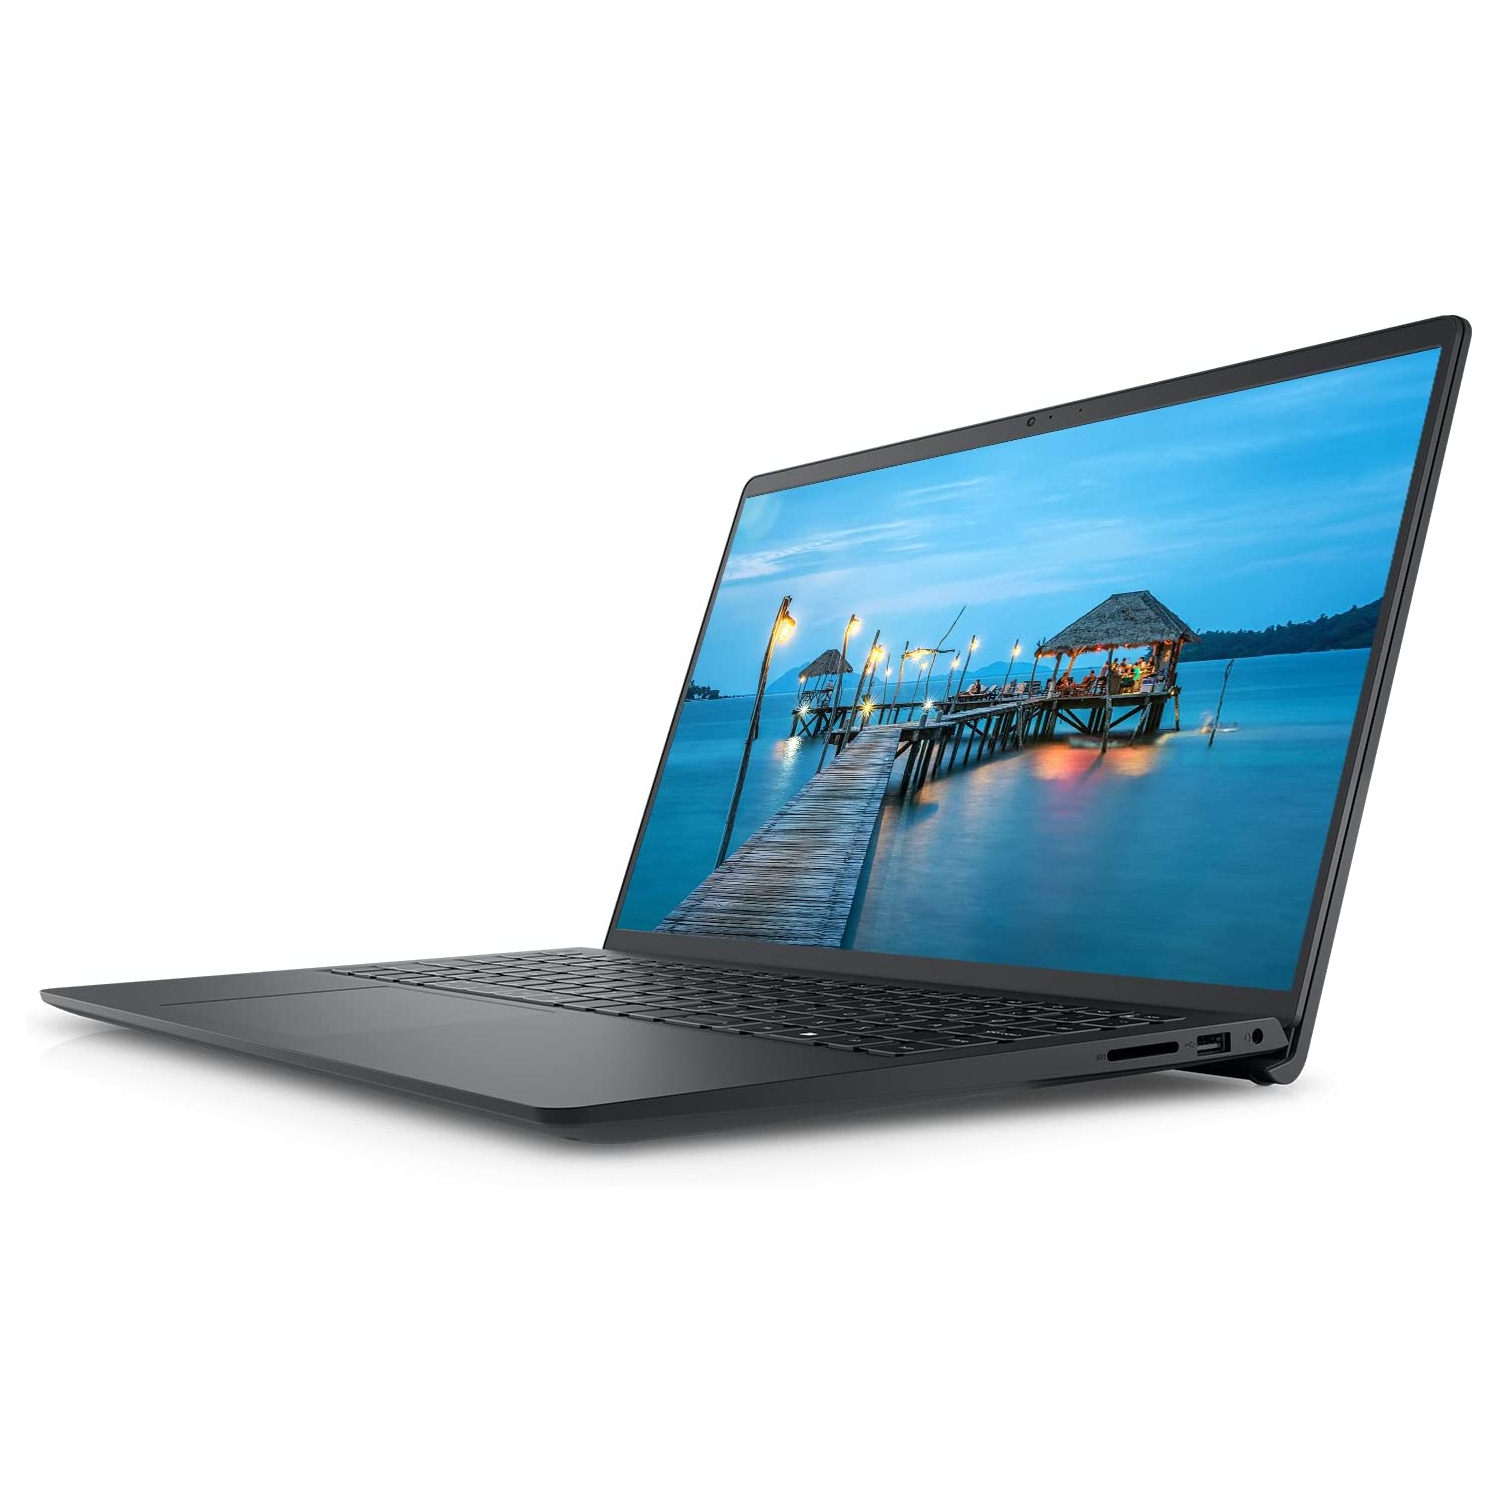 Refurbished (Excellent) – Dell Inspiron 3515 Laptop (2022) | 15.6" HD | Core Ryzen 5 - 256GB SSD - 8GB RAM | 4 Cores @ 3.5 GHz